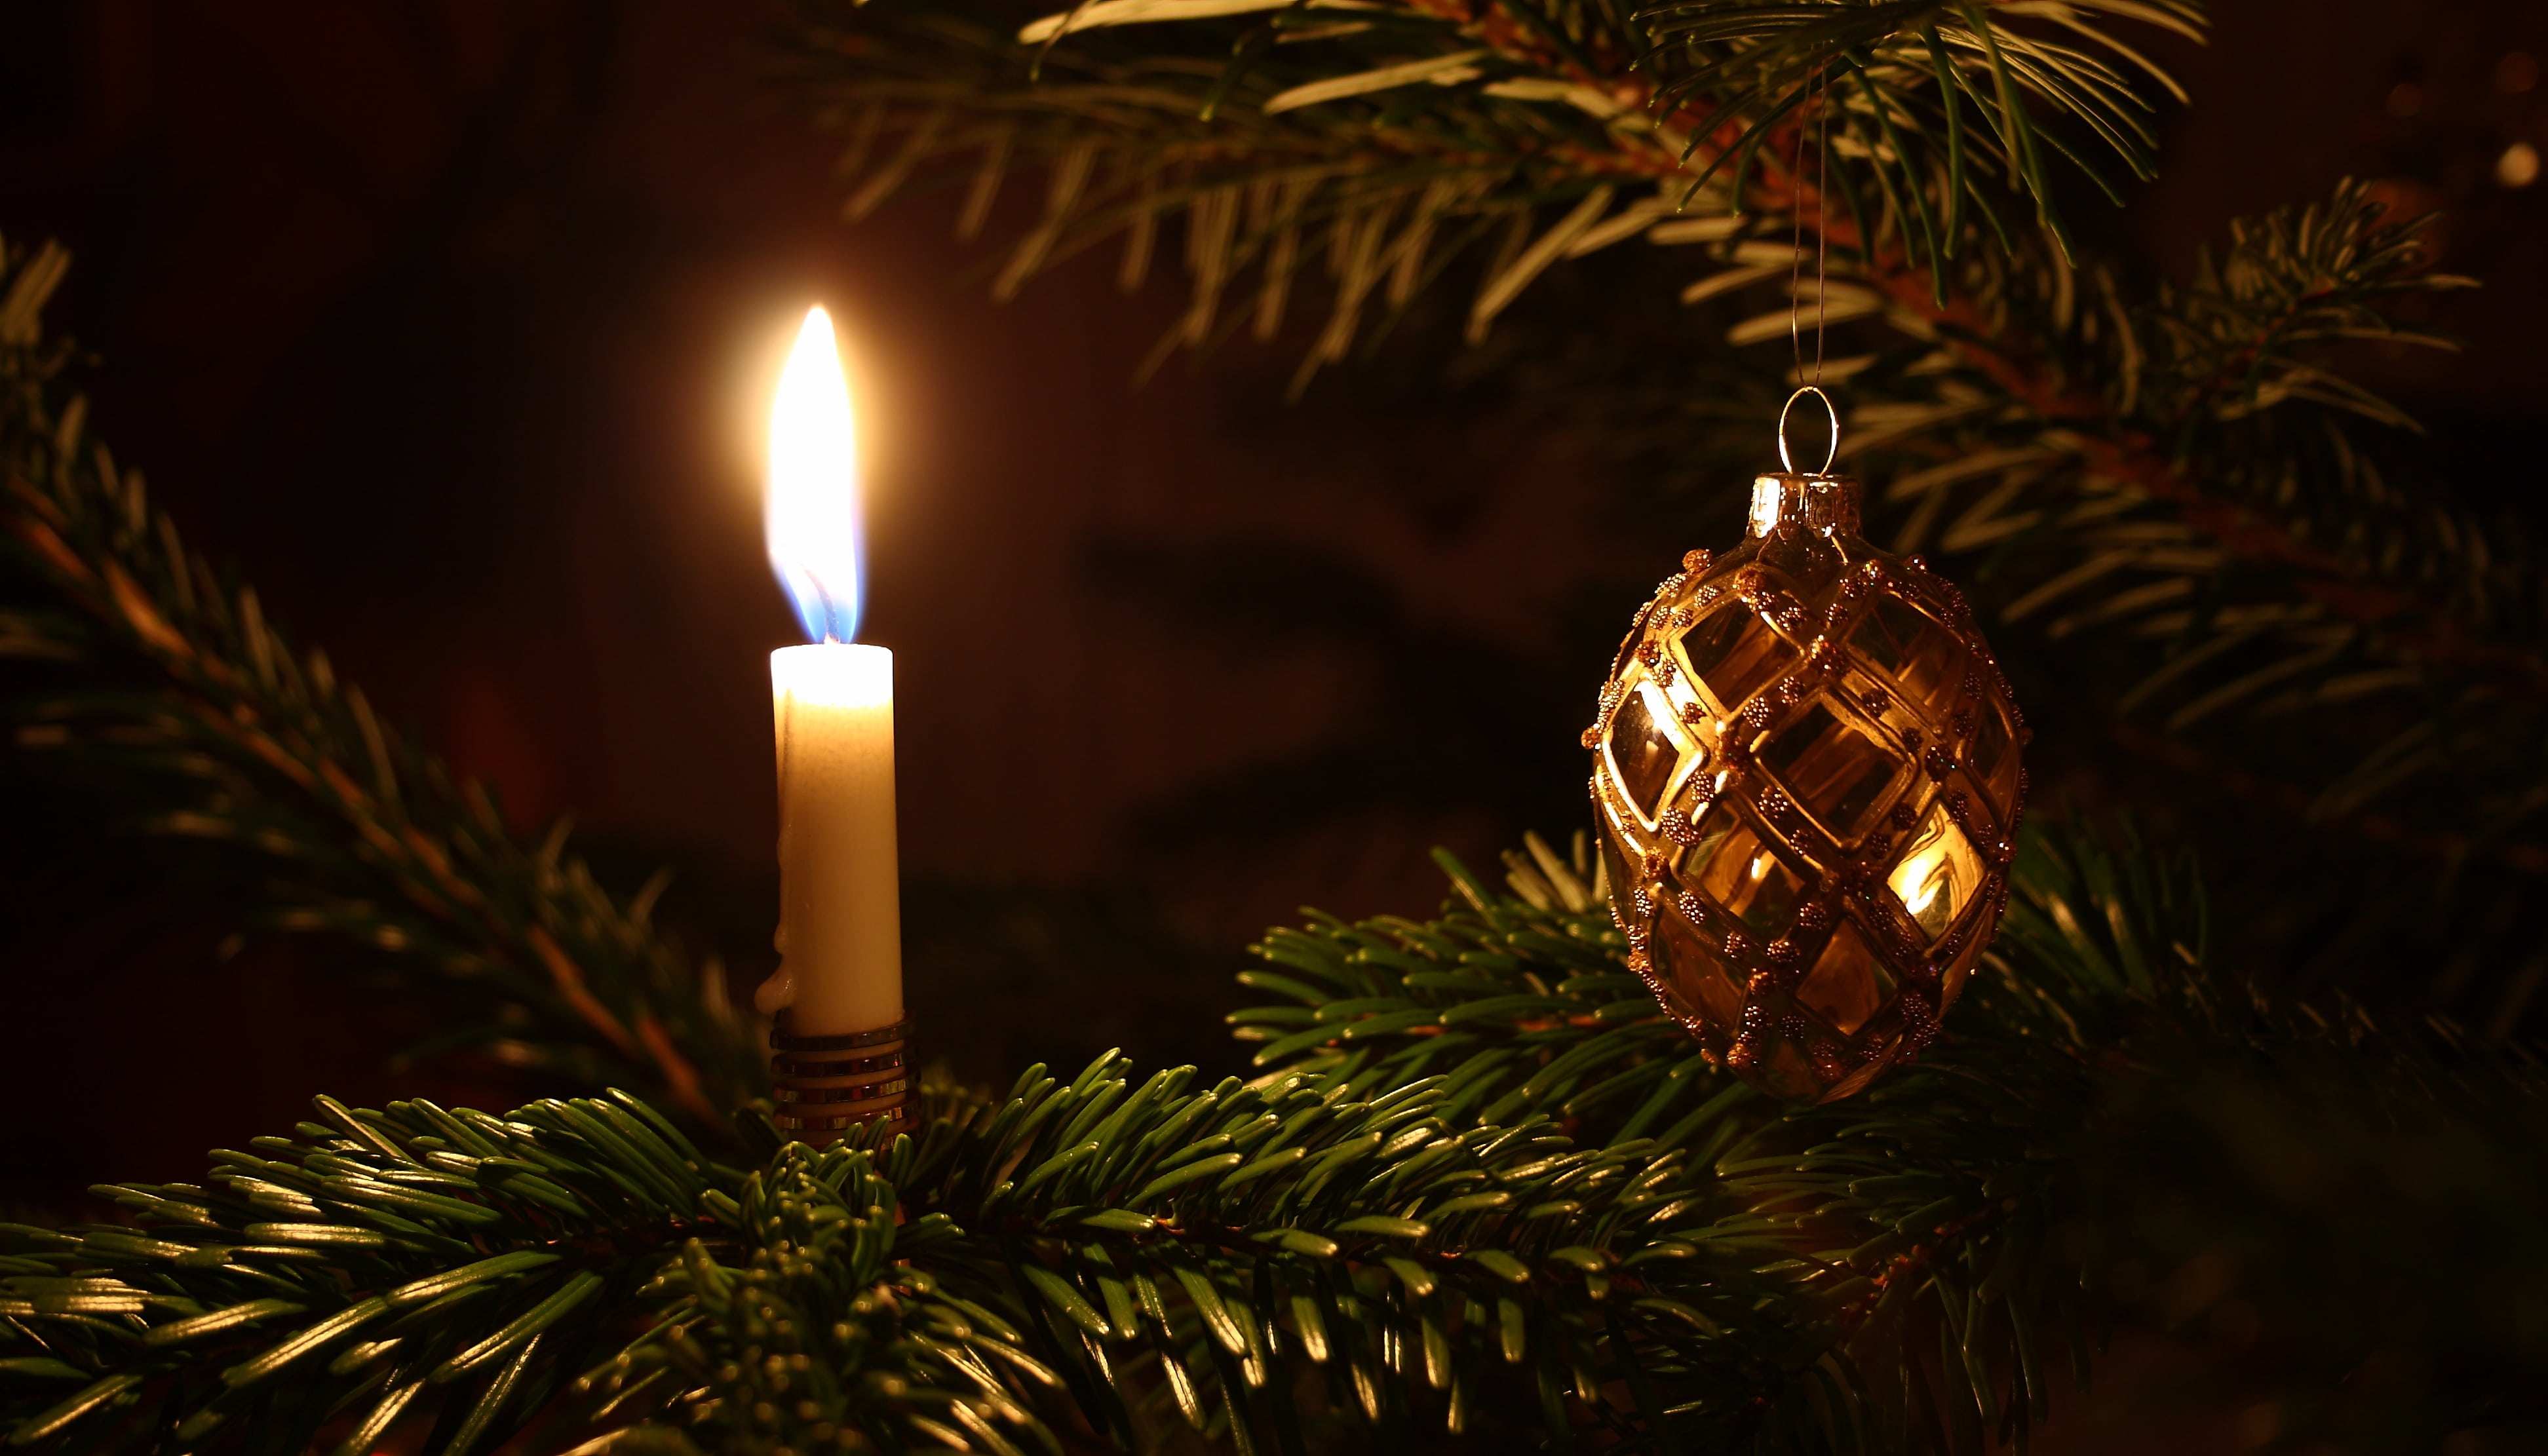 lighted taper candle beside Christmas ornament hanging on fir tree